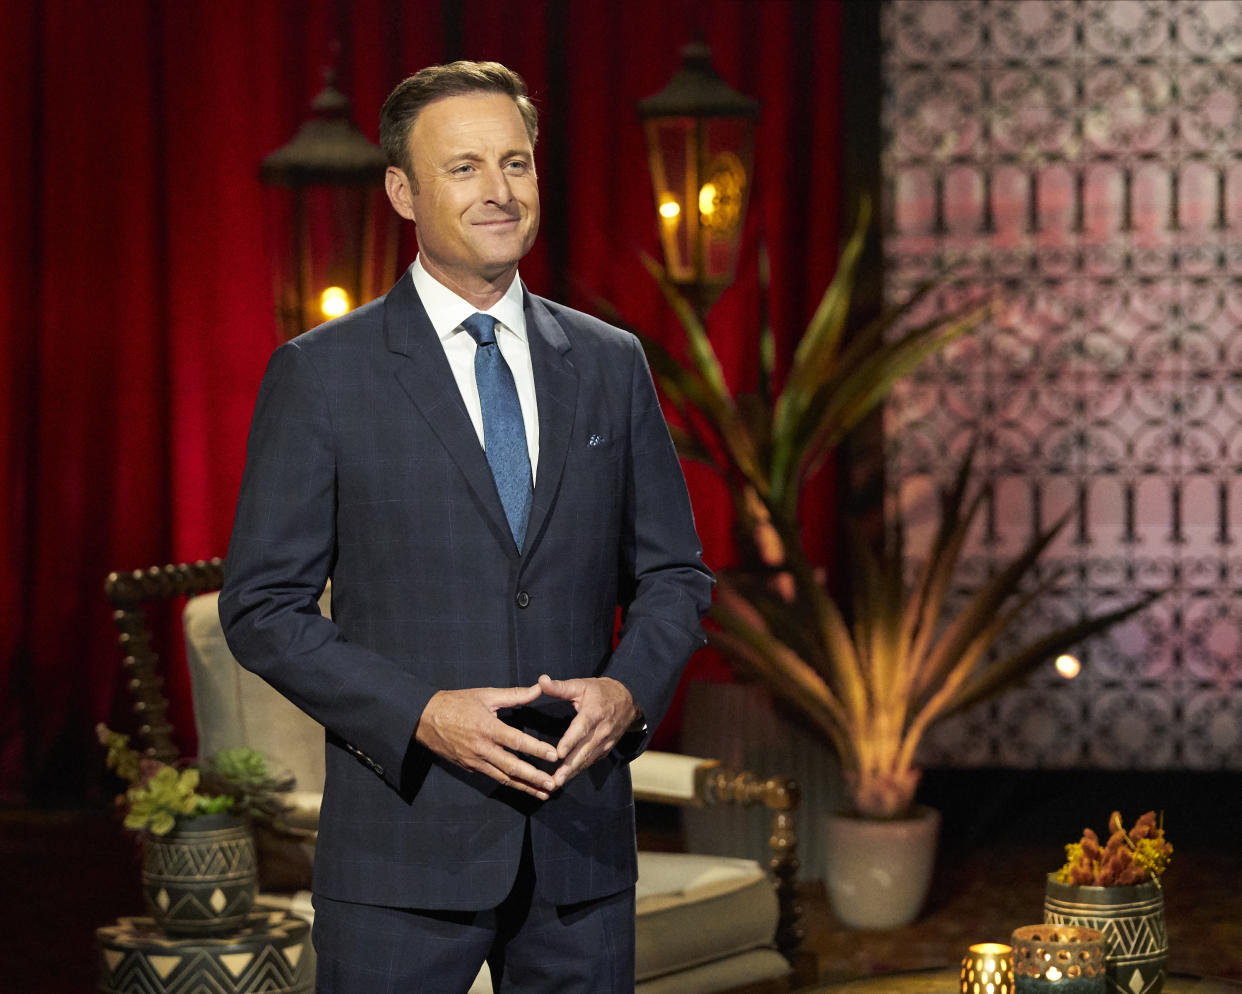 "The Bachelor" host Chris Harrison is stepping away from the television franchise following a number of controversies. (Photo: Craig Sjodin/ABC via Getty Images)